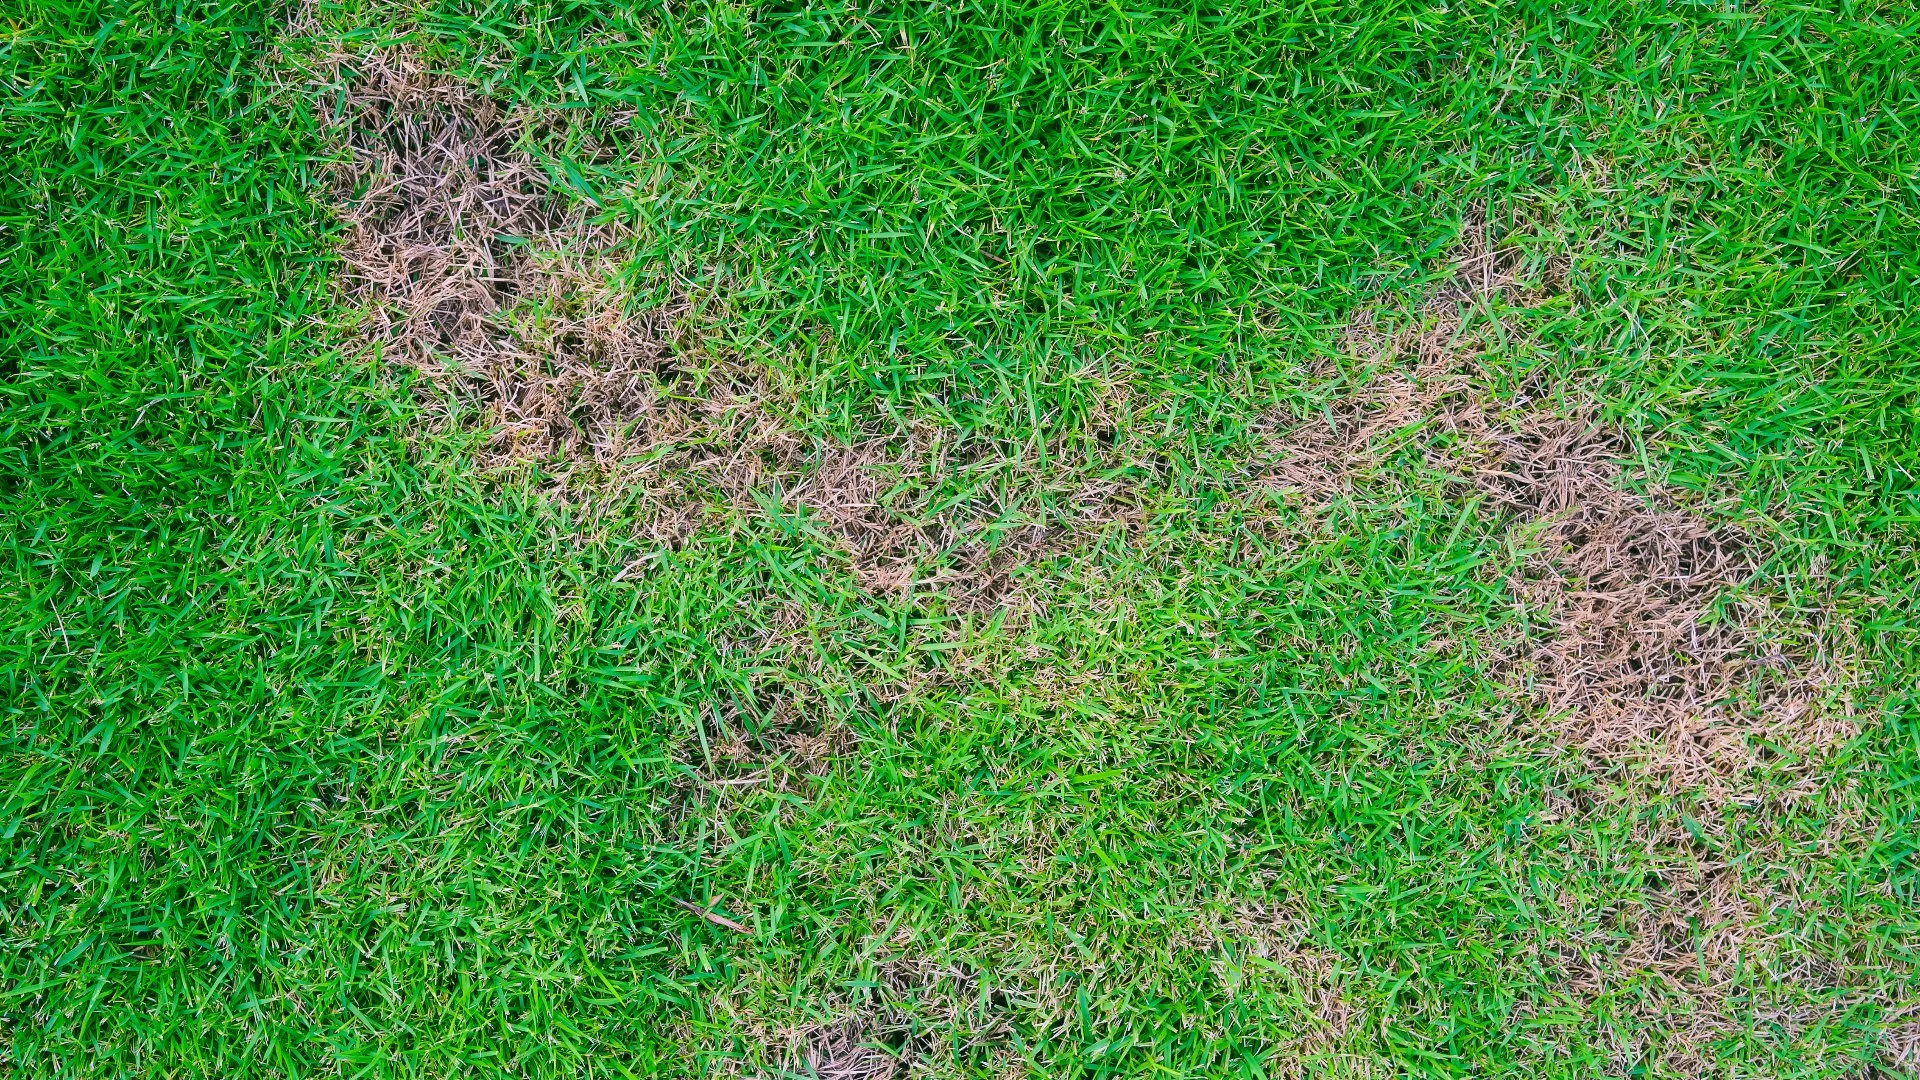 Chinch Bugs vs Billbugs - Which One Is Destroying Your Lawn in Colorado?